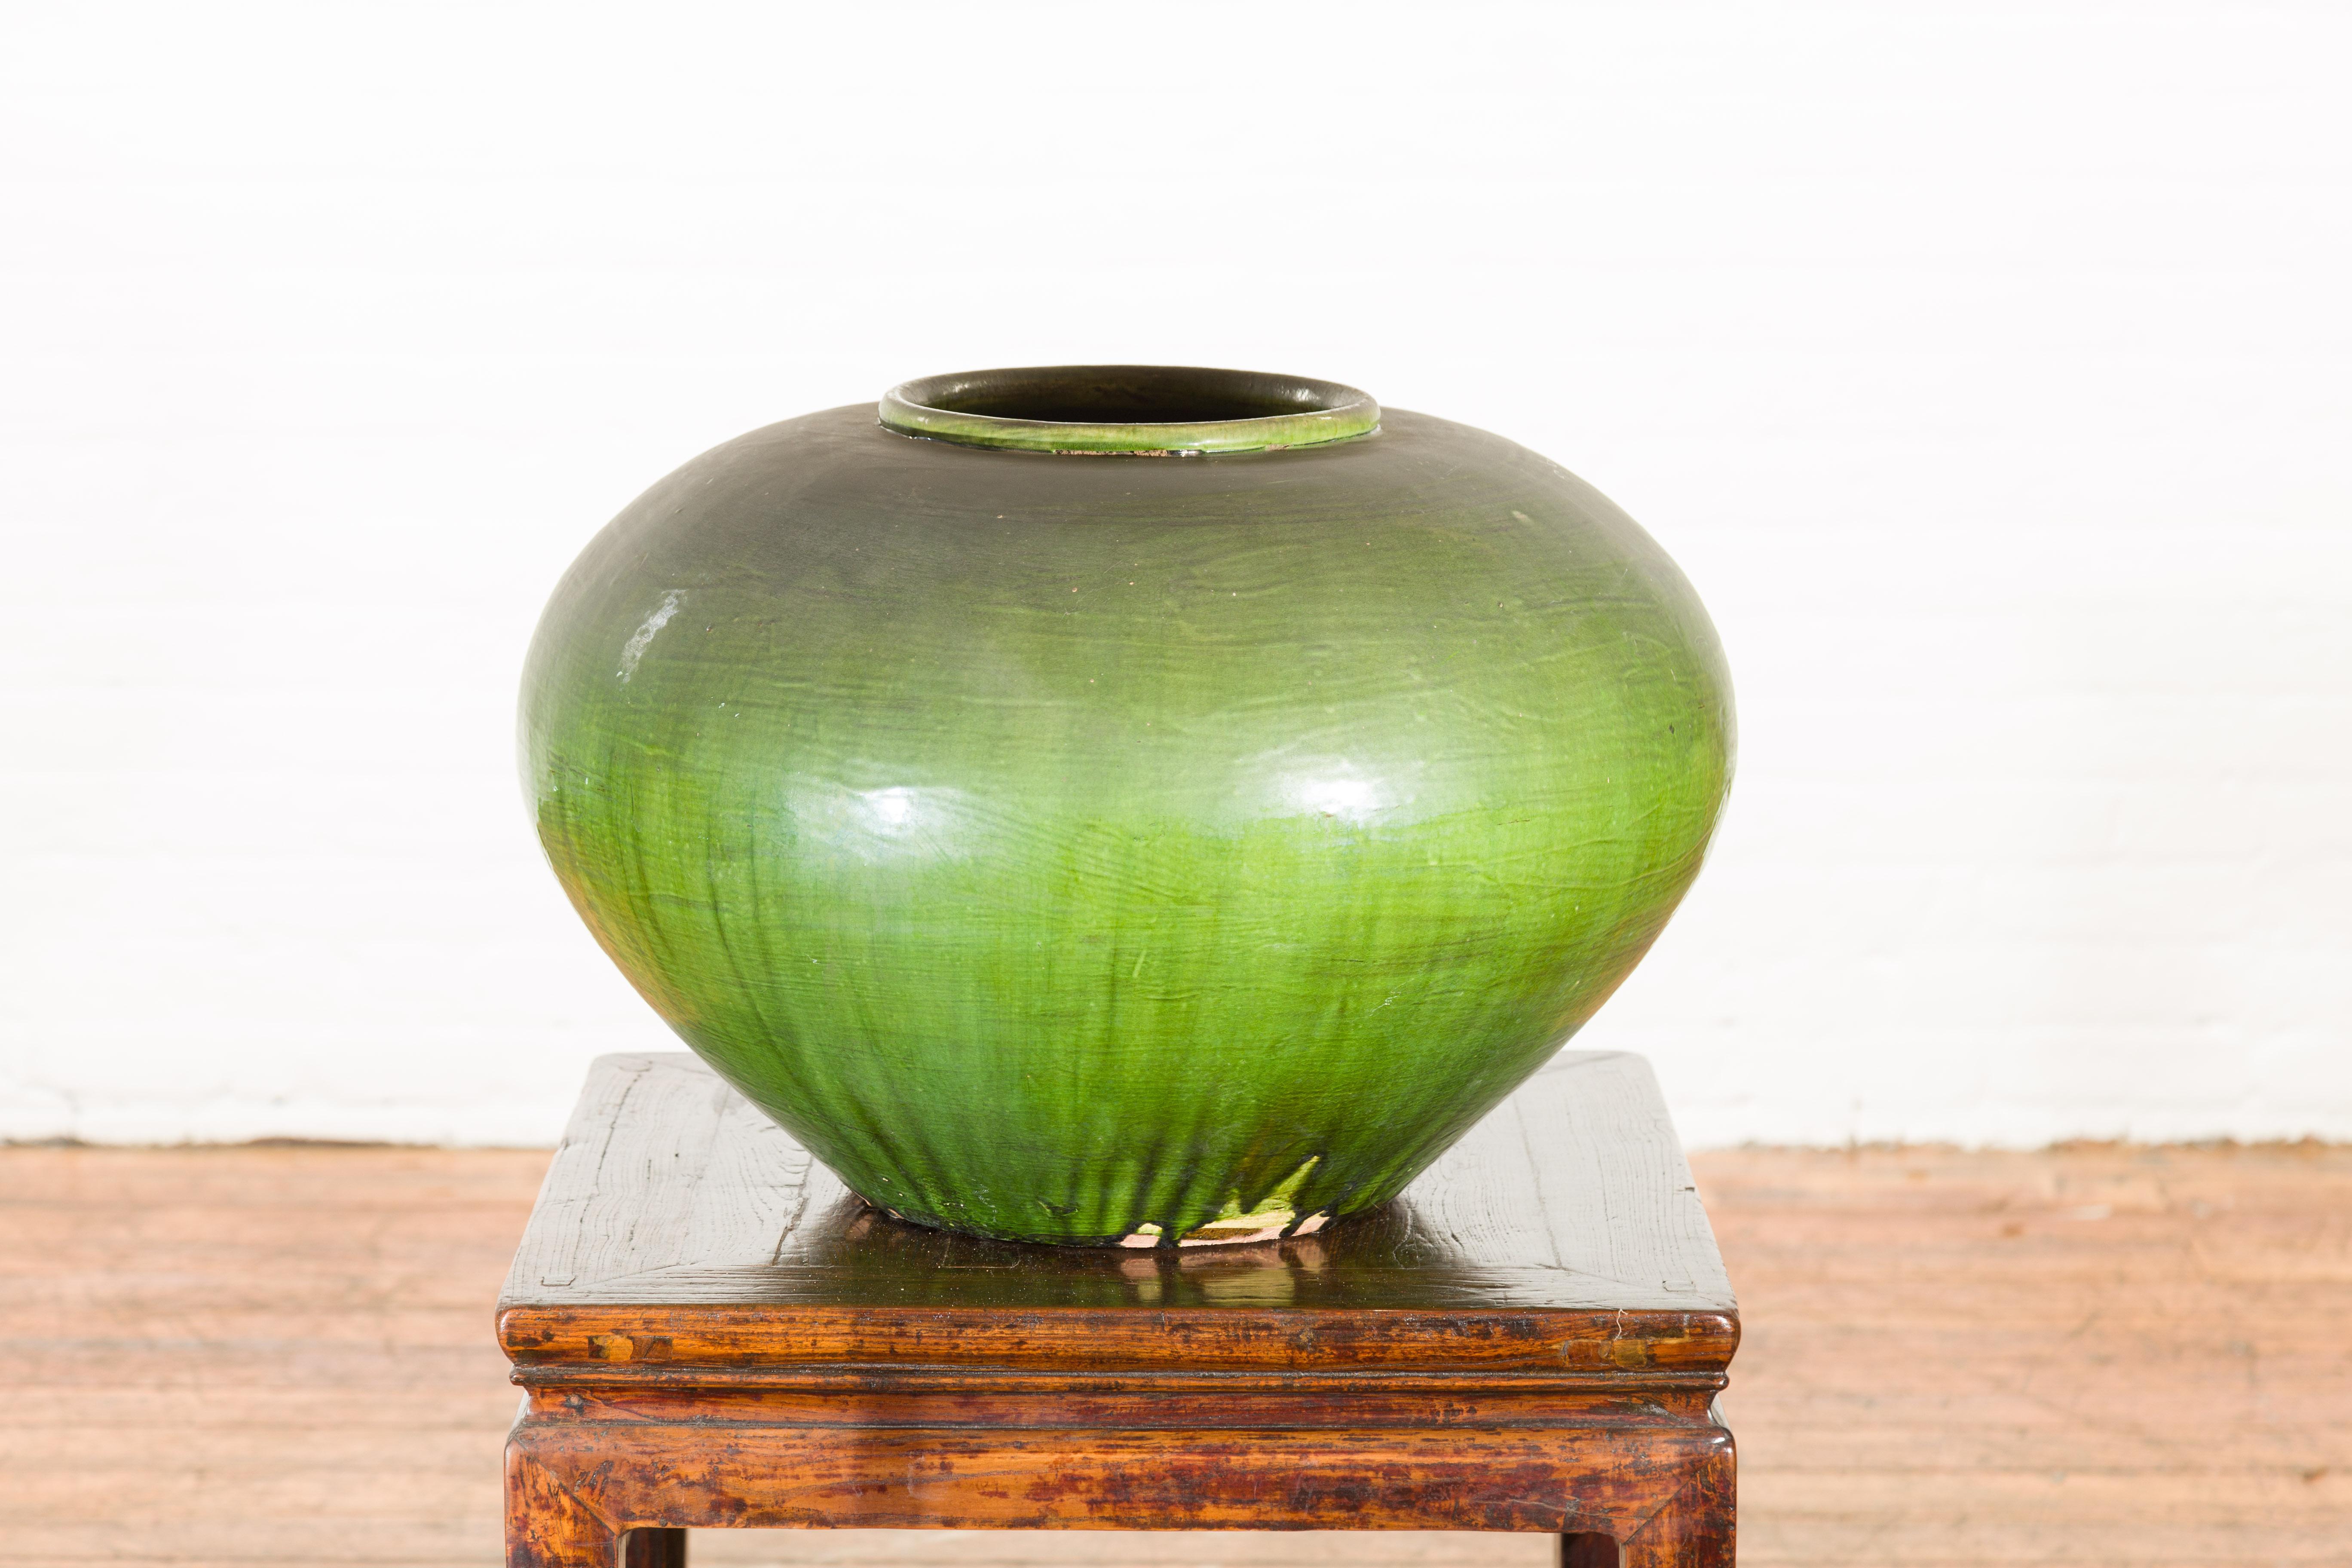 Chinese Vintage Porcelain Low Squat Planter with Verde Glaze and Aged Patina For Sale 5